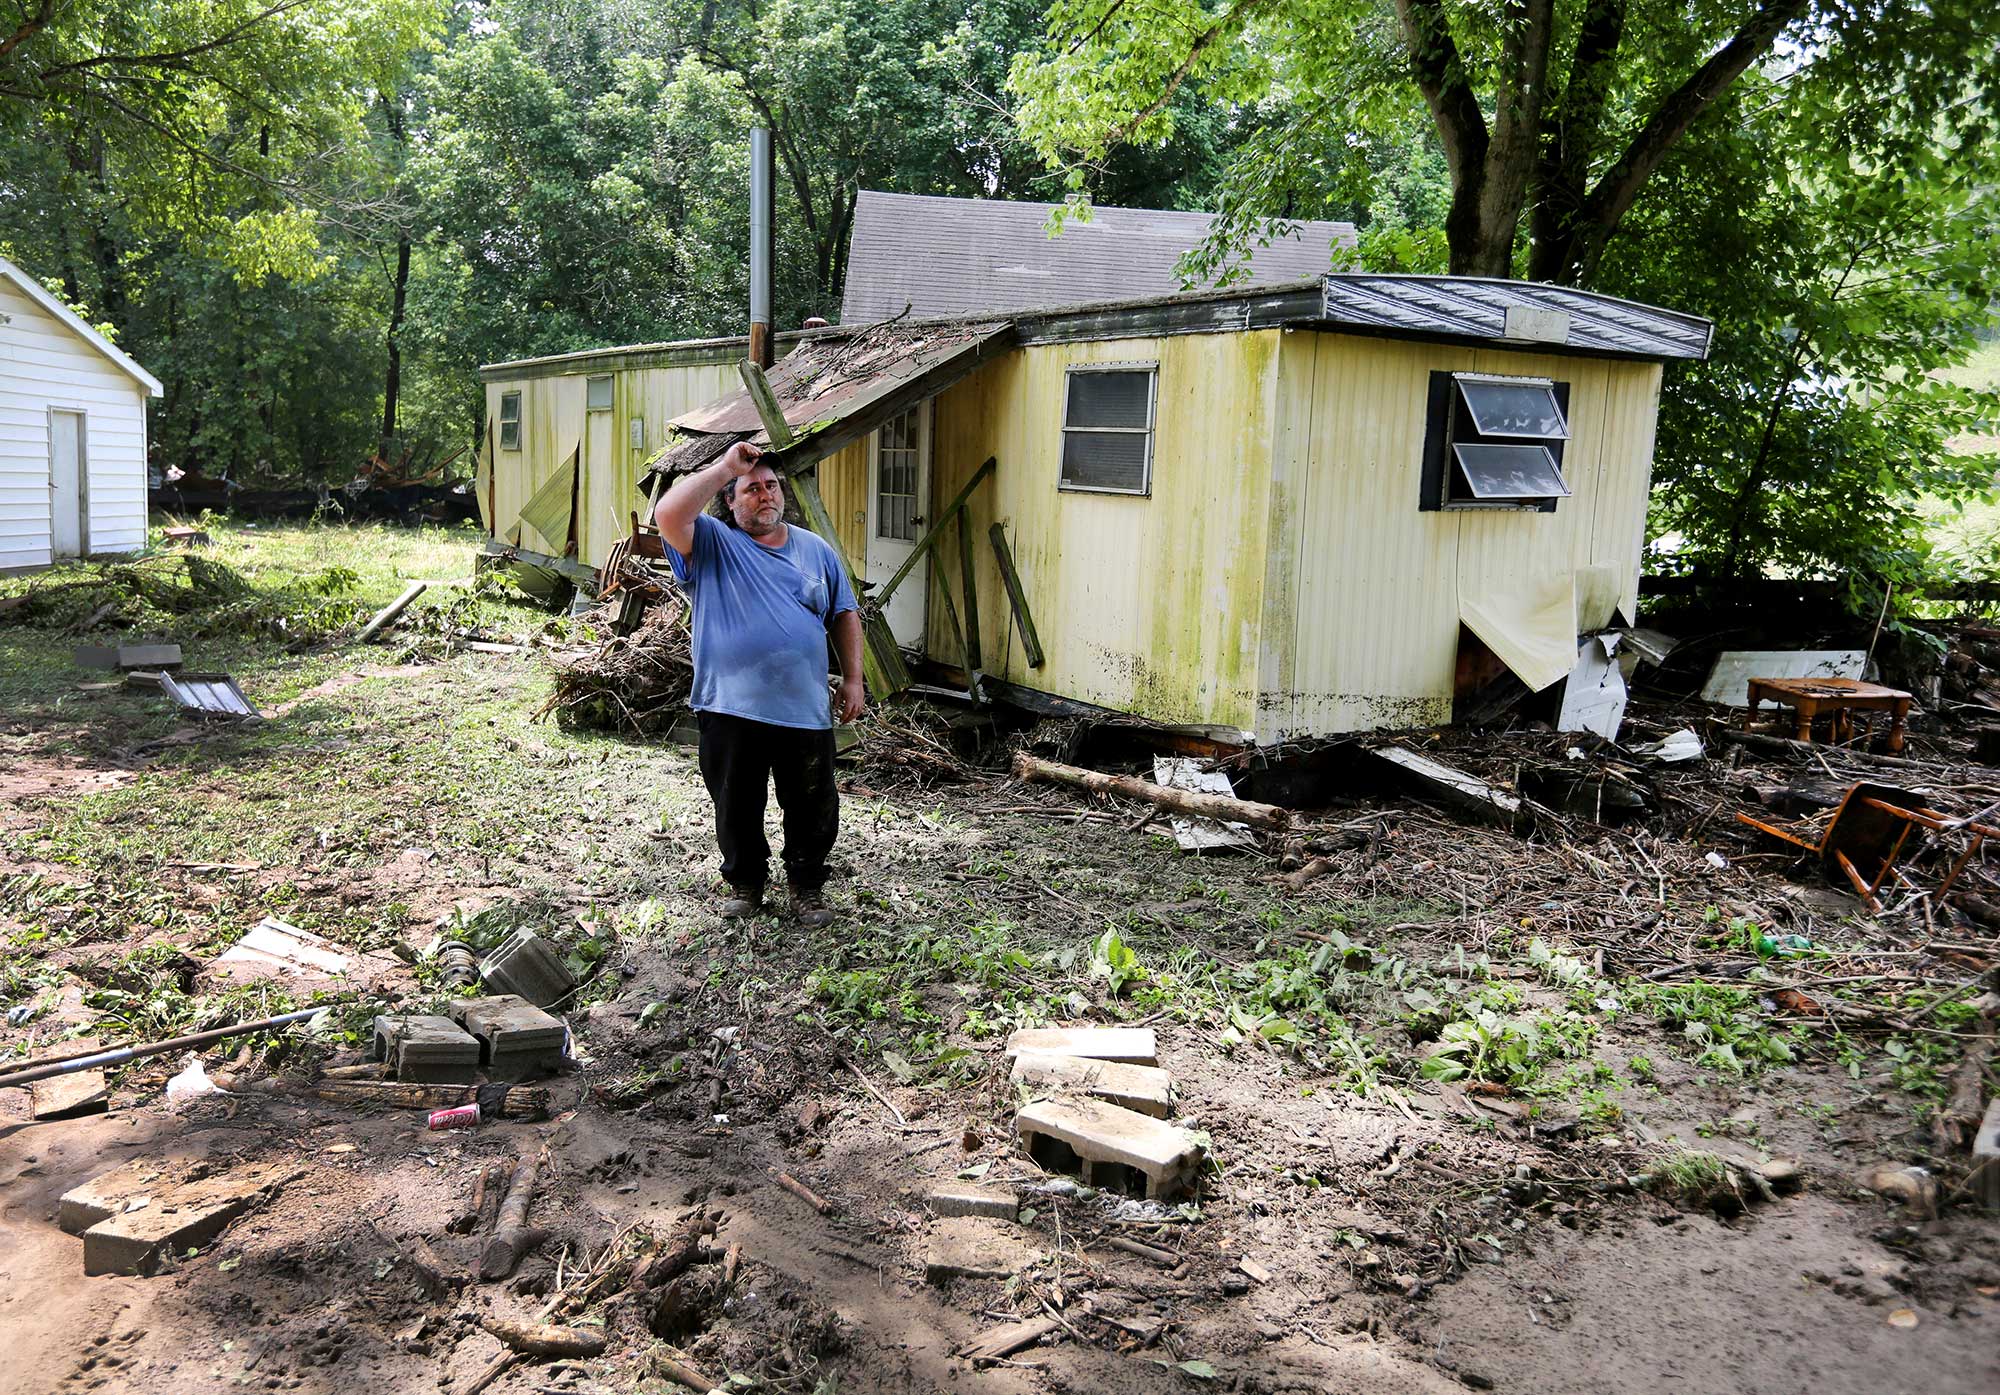 Jeff Downing walks around his property after severe flooding in Ripley, Ohio on July 19, 2015. (Liz Dufour—The Cincinnati Enquirer/AP)